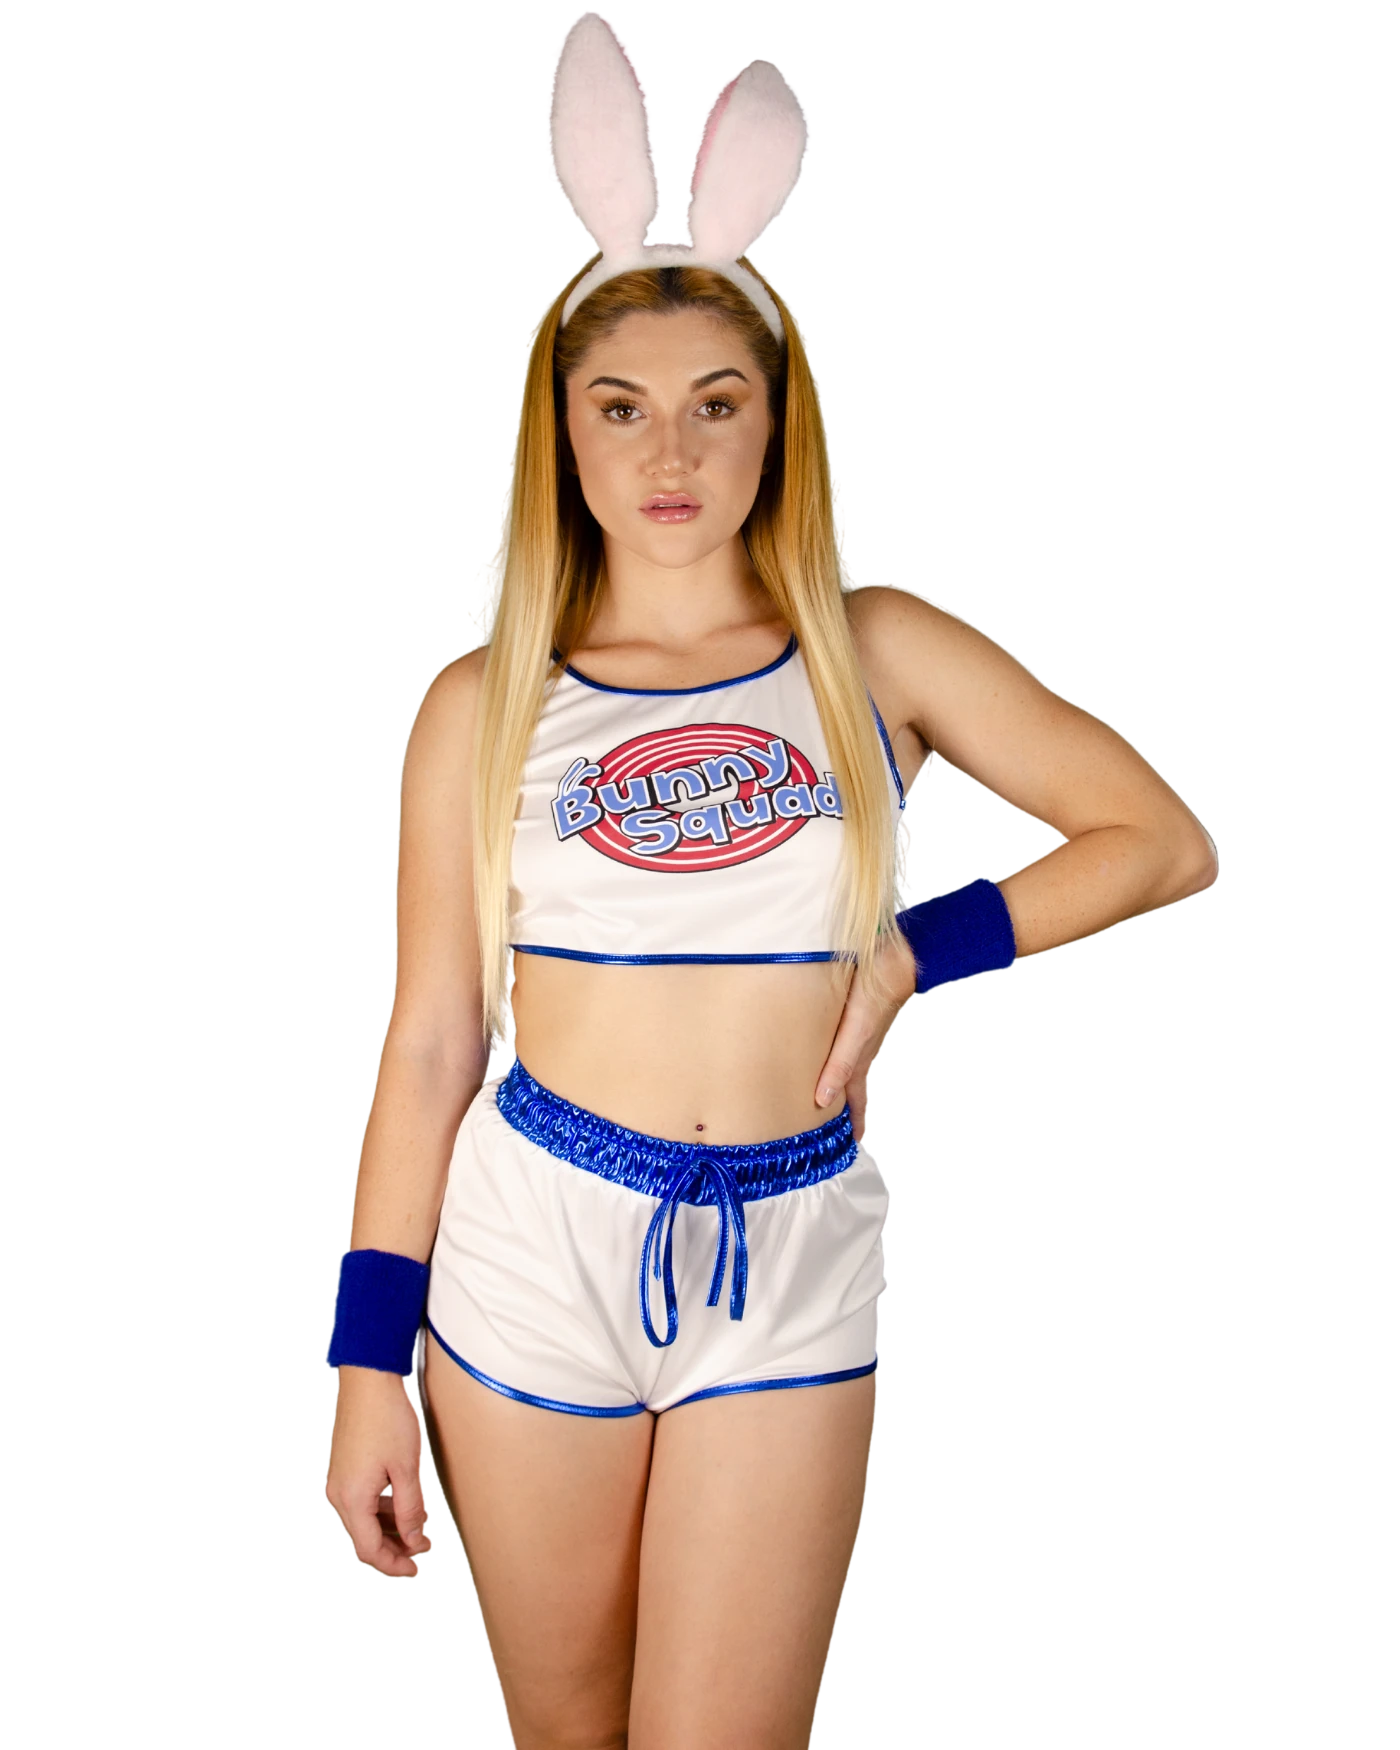 Model posing in a white costume with bunny ears and shorts